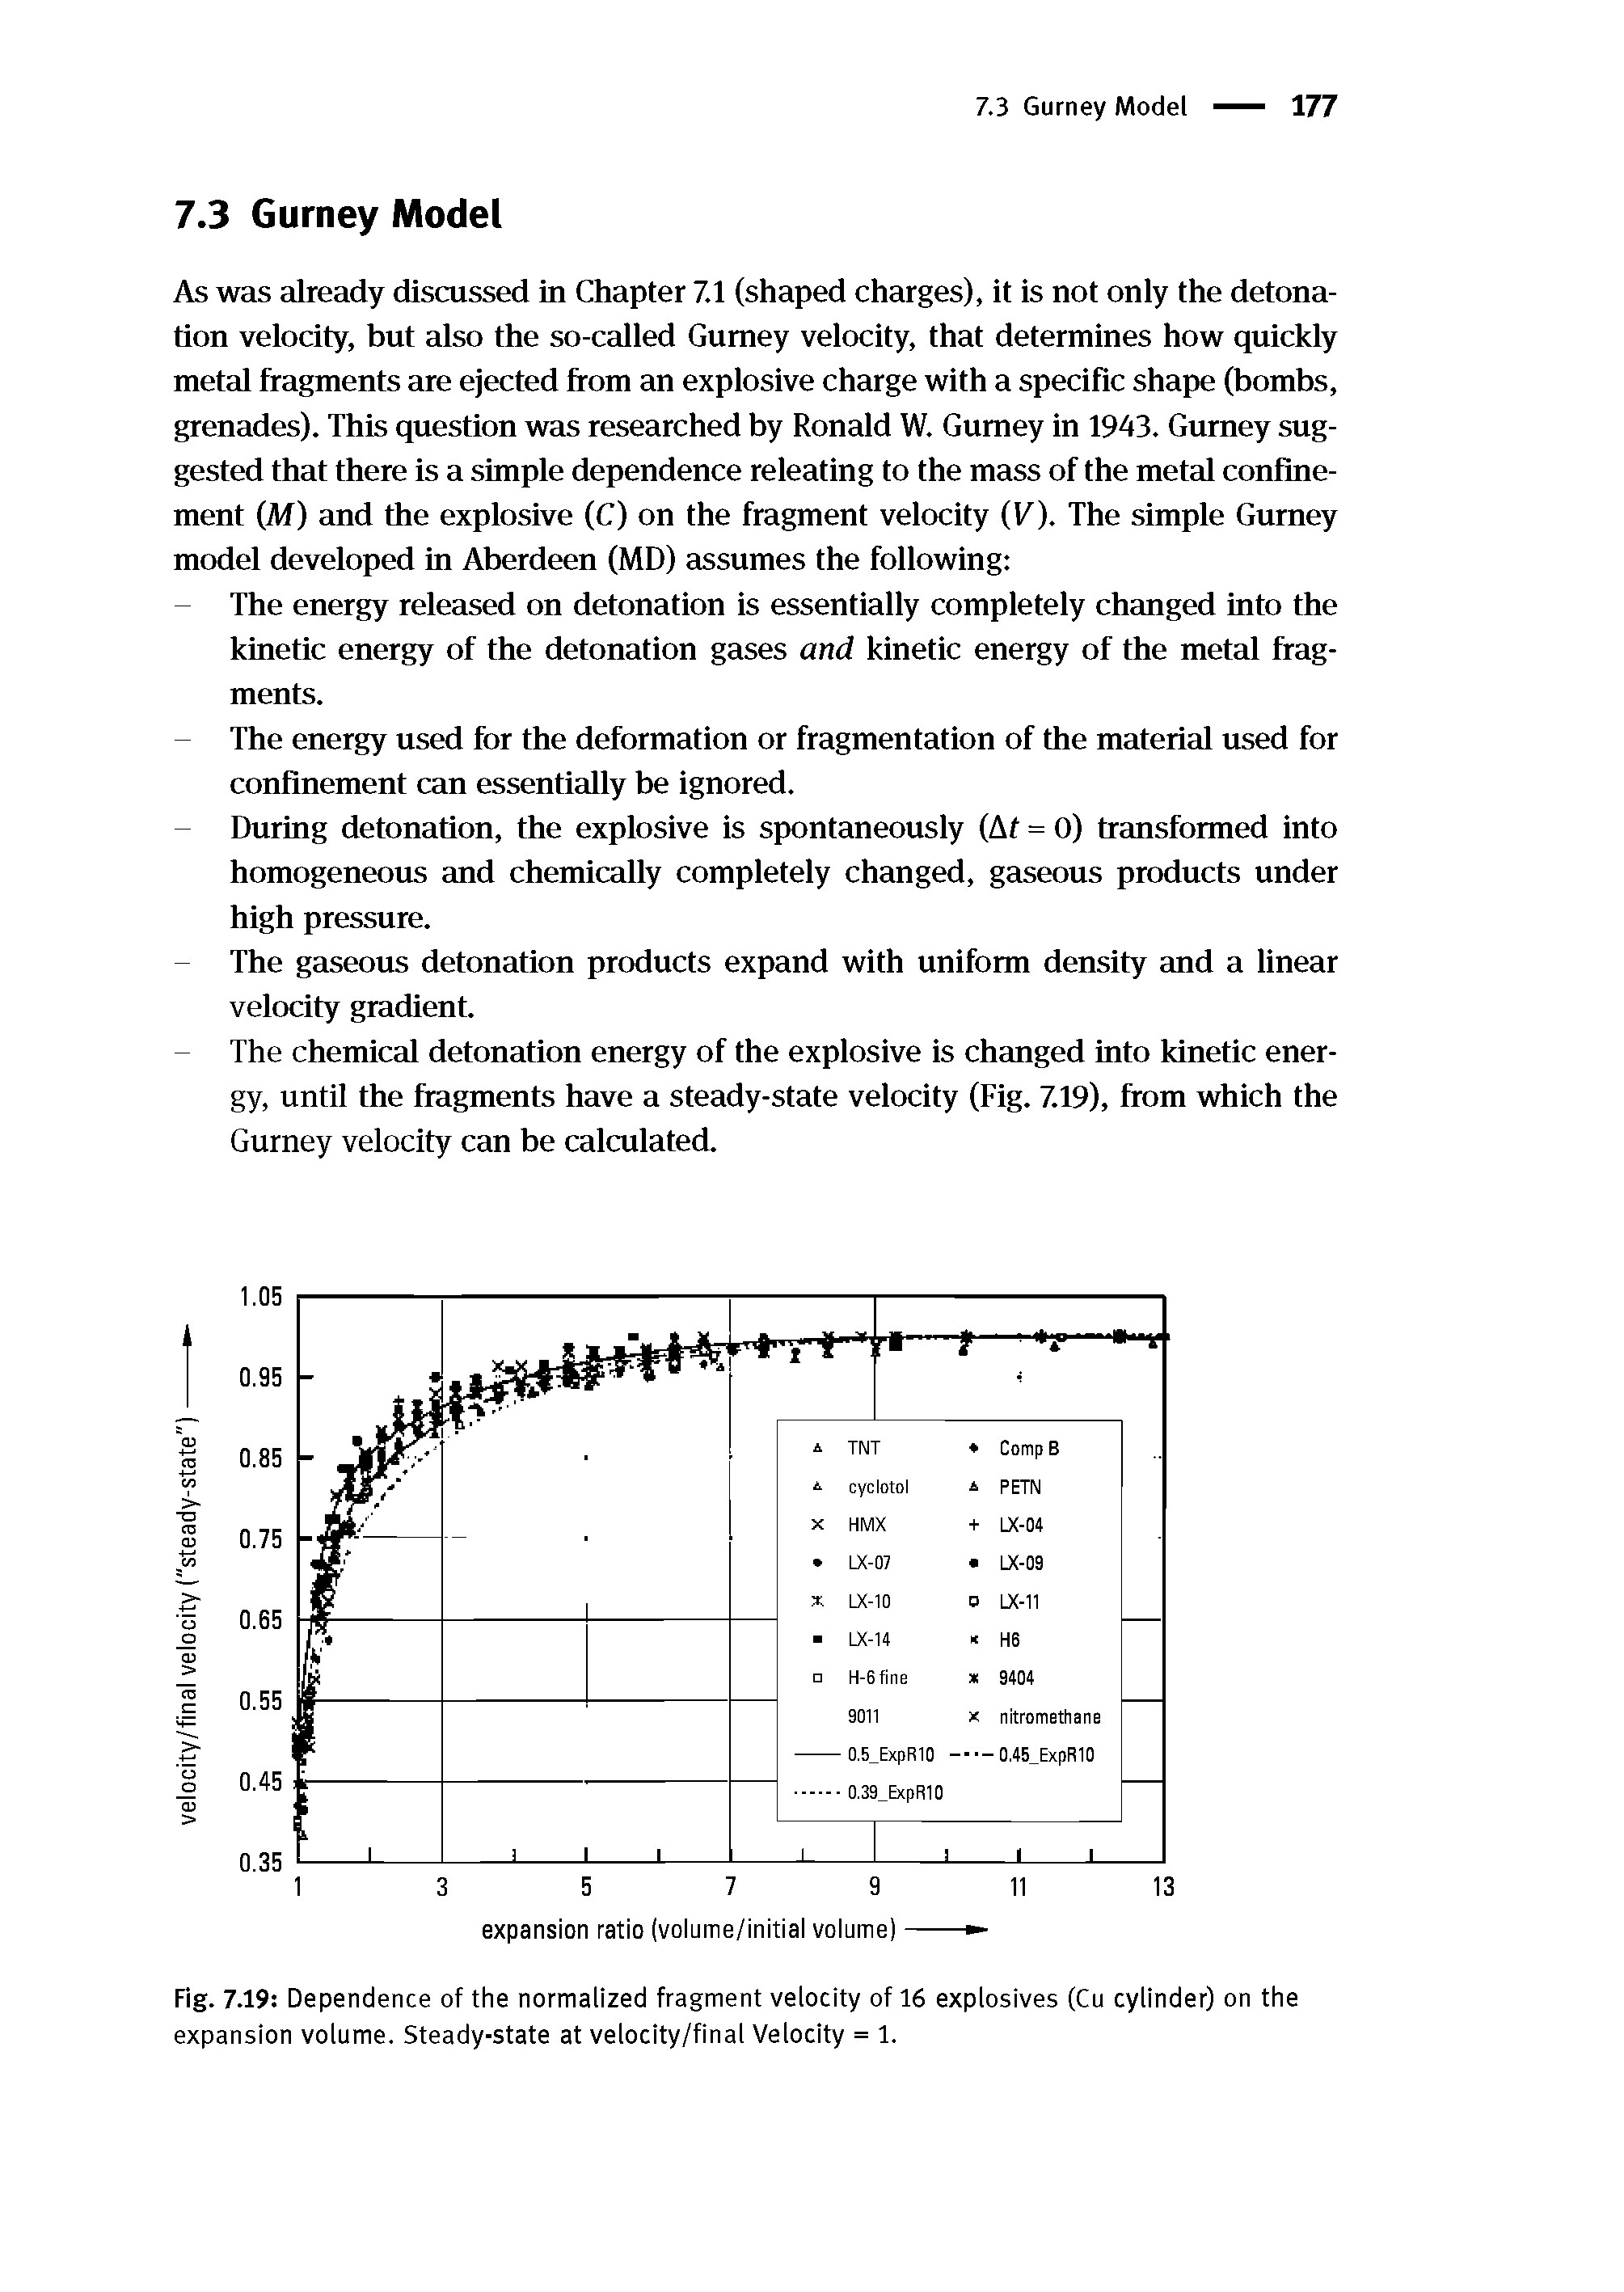 Fig. 7.19 Dependence of the normalized fragment velocity of 16 explosives (Cu cylinder) on the expansion volume. Steady-state at velocity/final Velocity = 1.